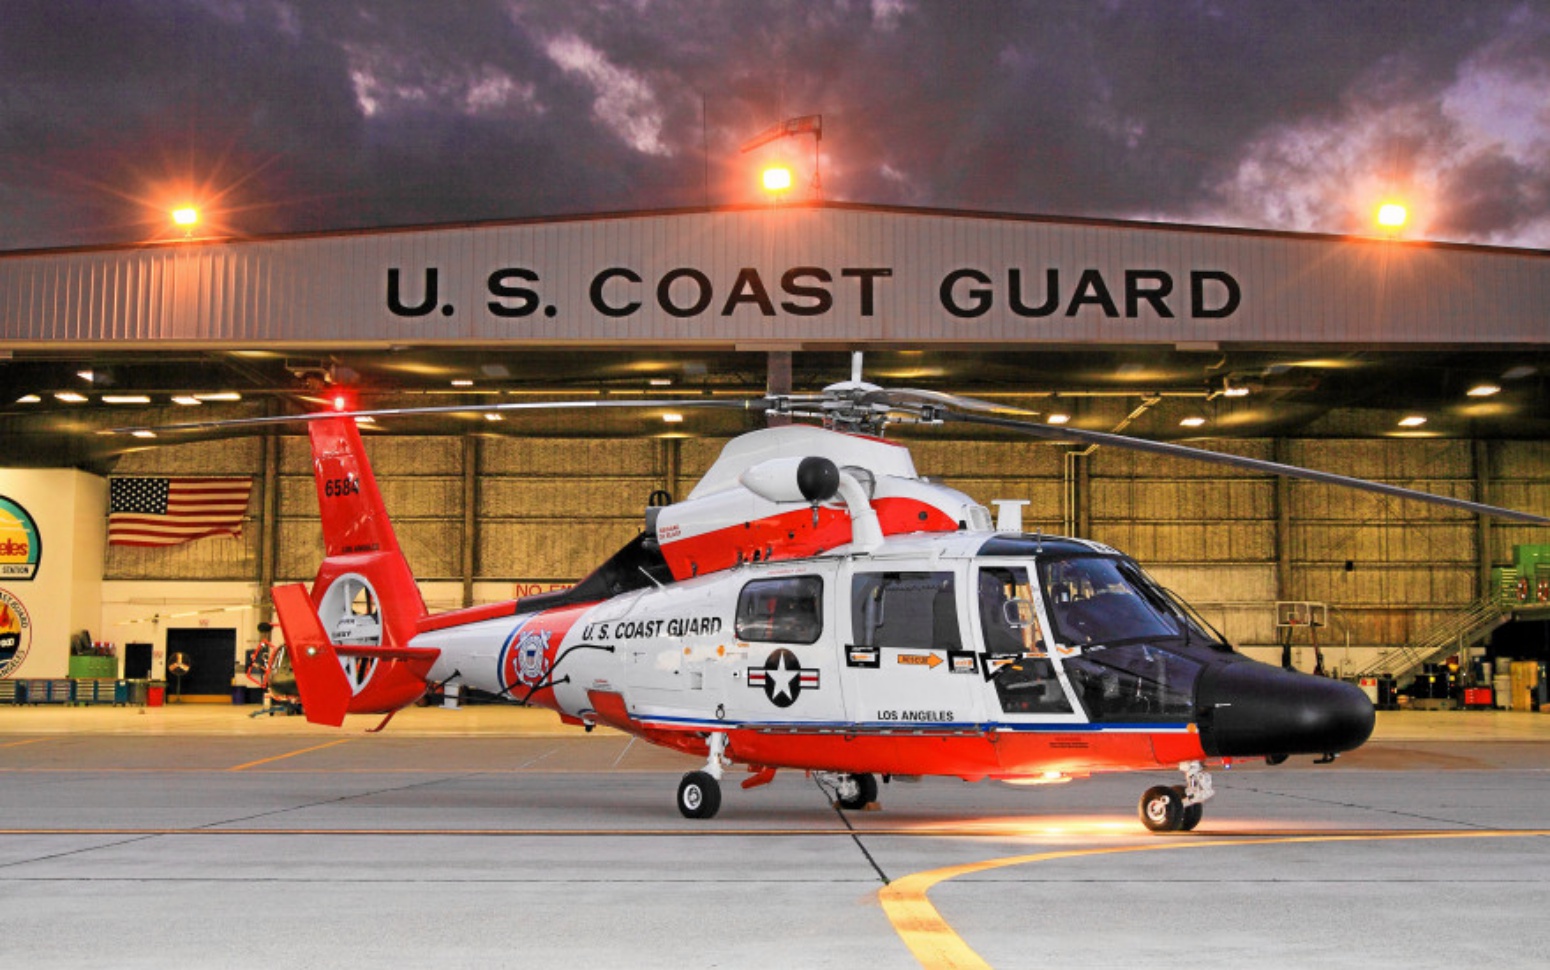 Drone came within 50 feet of hitting a MH-65 Dolphin Coast Guard helicopter